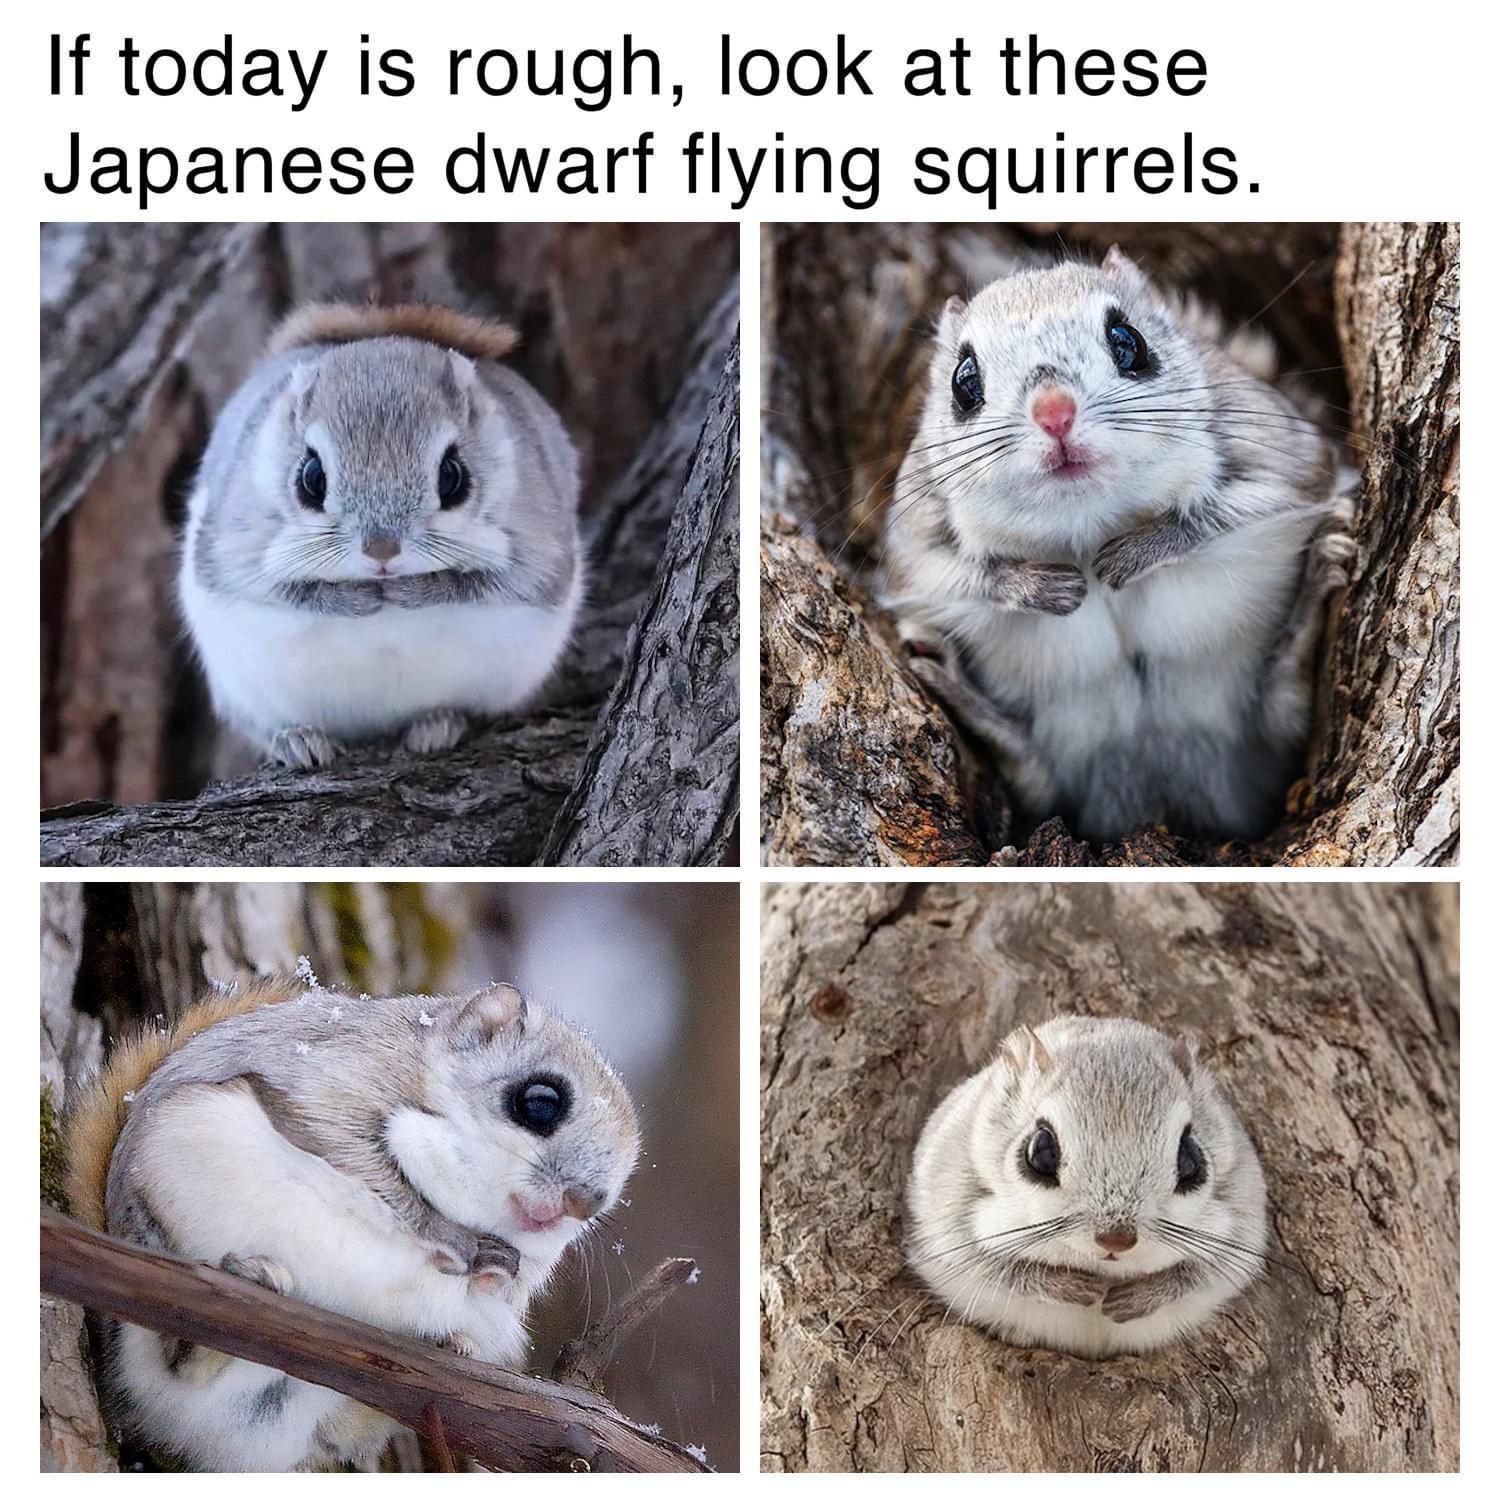 monday morning randomness - fauna - If today is rough, look at these Japanese dwarf flying squirrels.